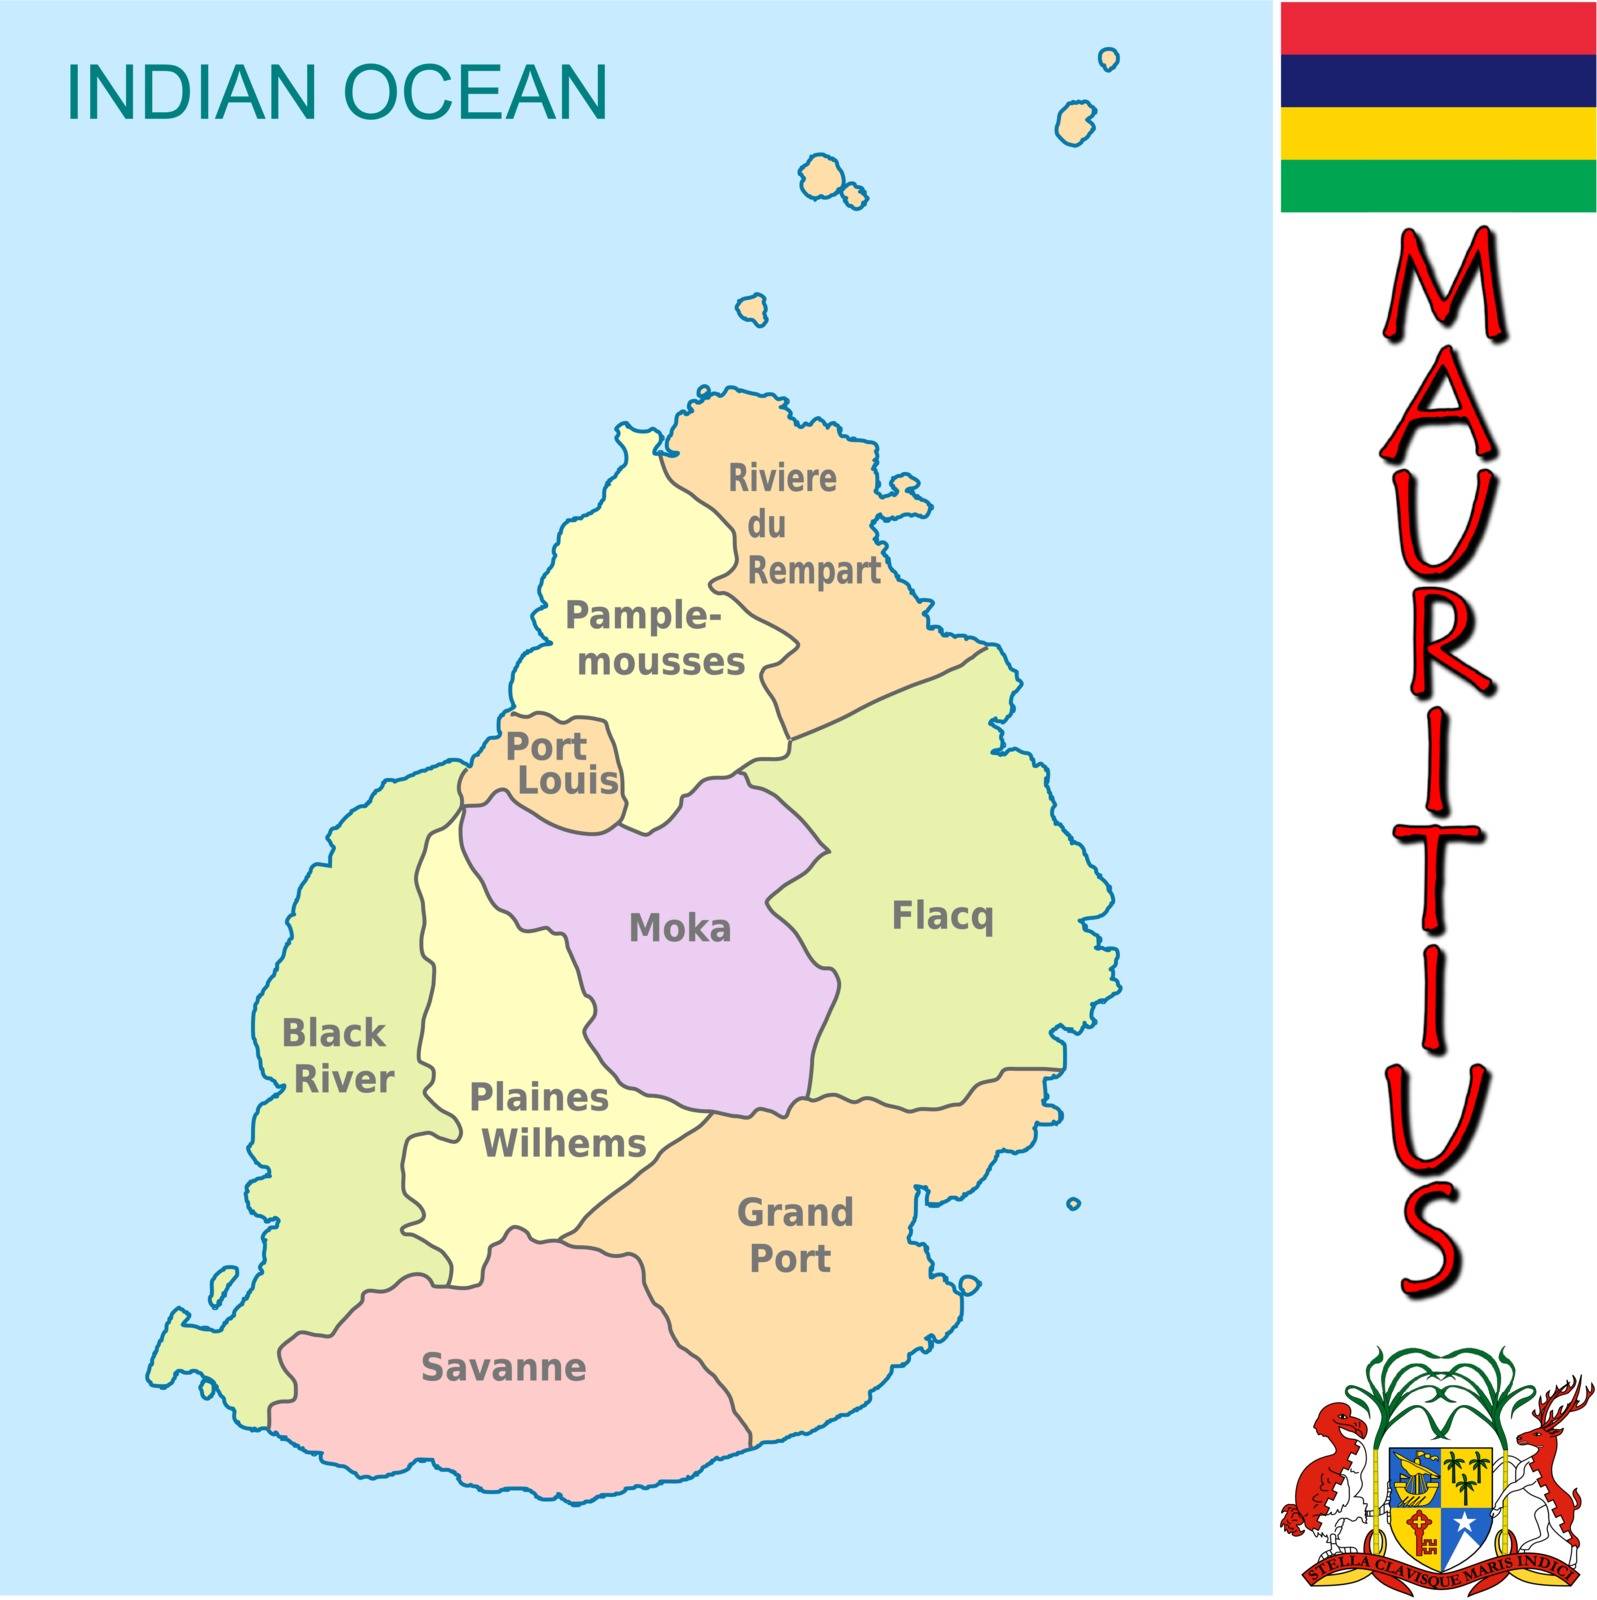 Mauritius divisions by JRTBurr